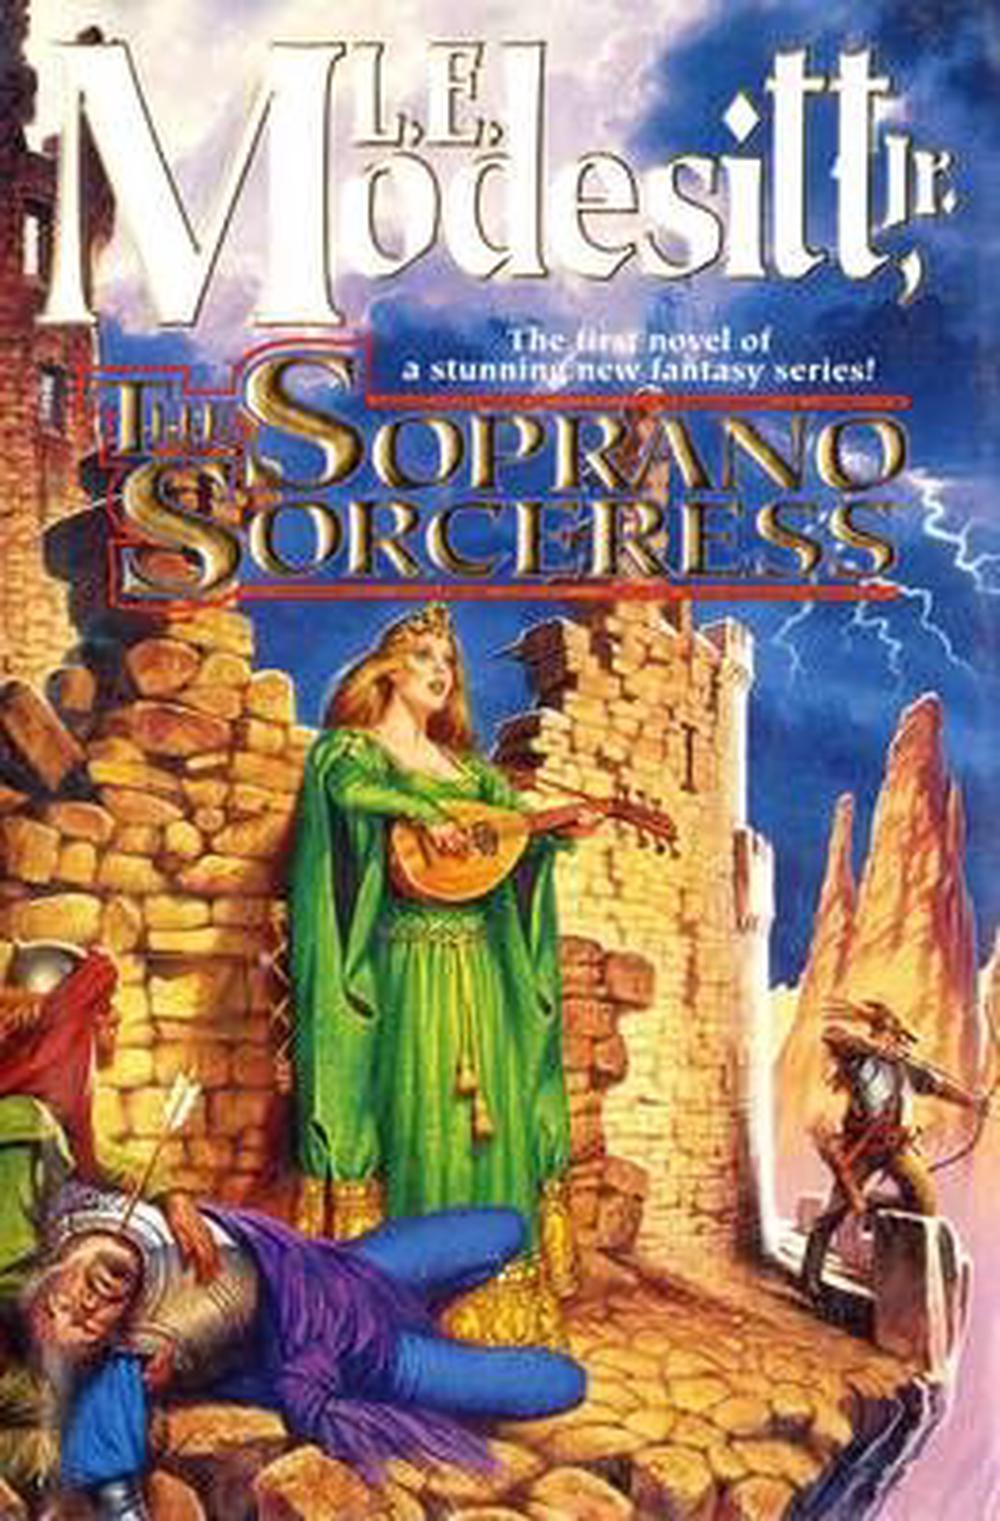 The Soprano Sorceress The First Book of the Spellsong Cycle by L.E. Jr